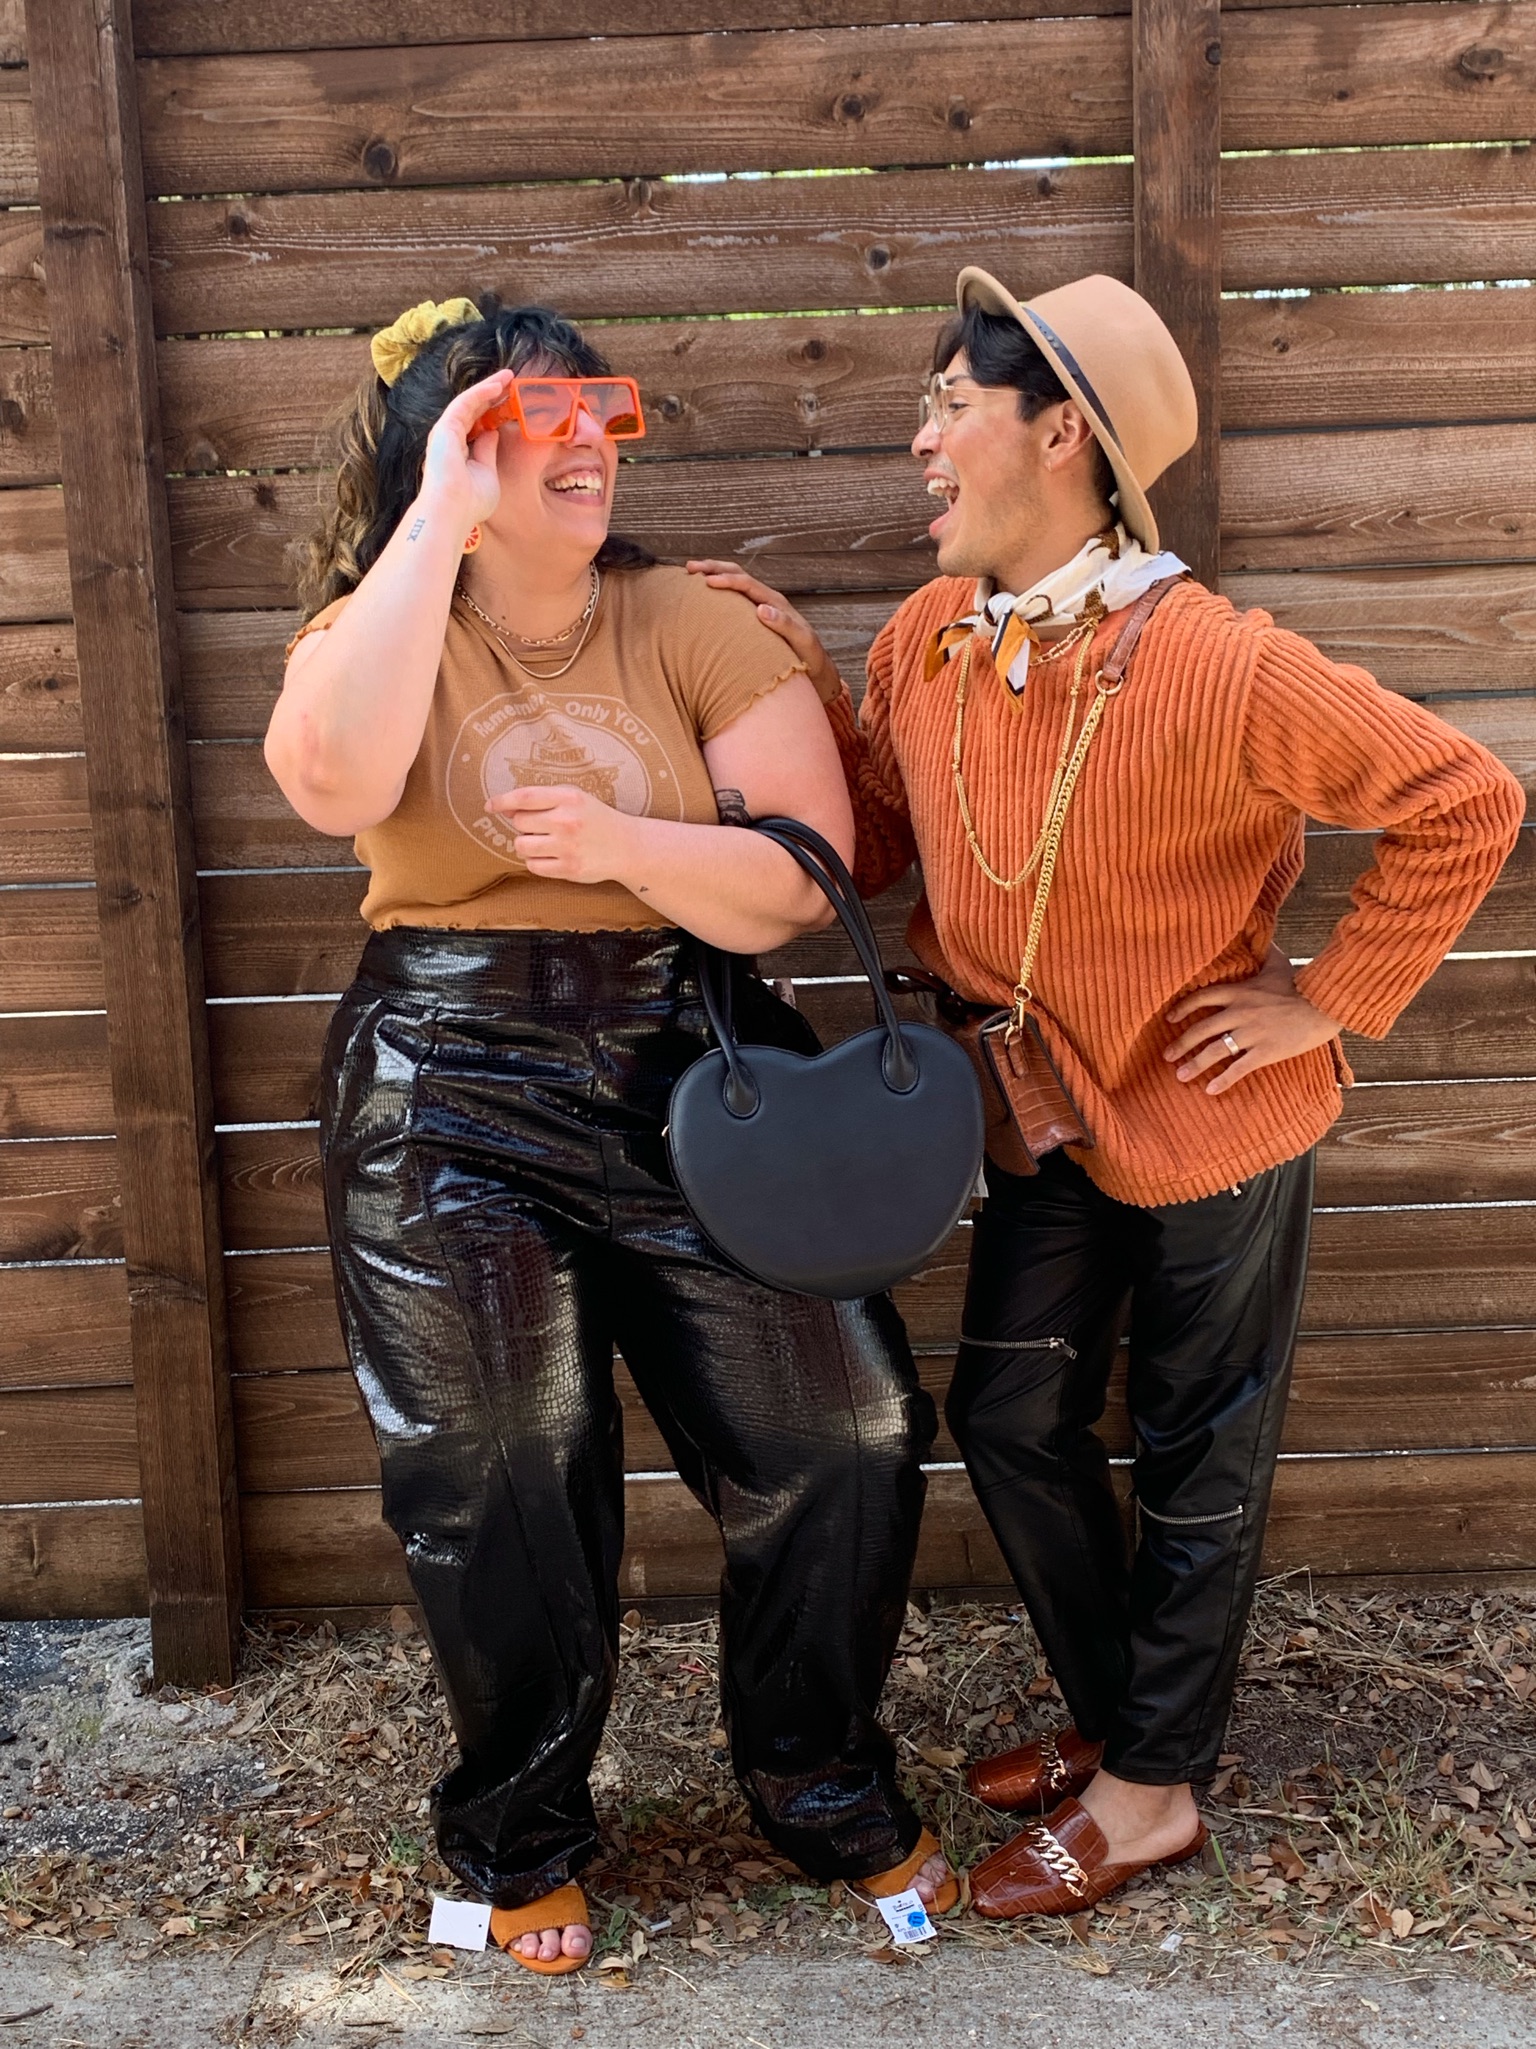 2 people in front of a wood fence laughing and wearing orange tops and black pleather pants